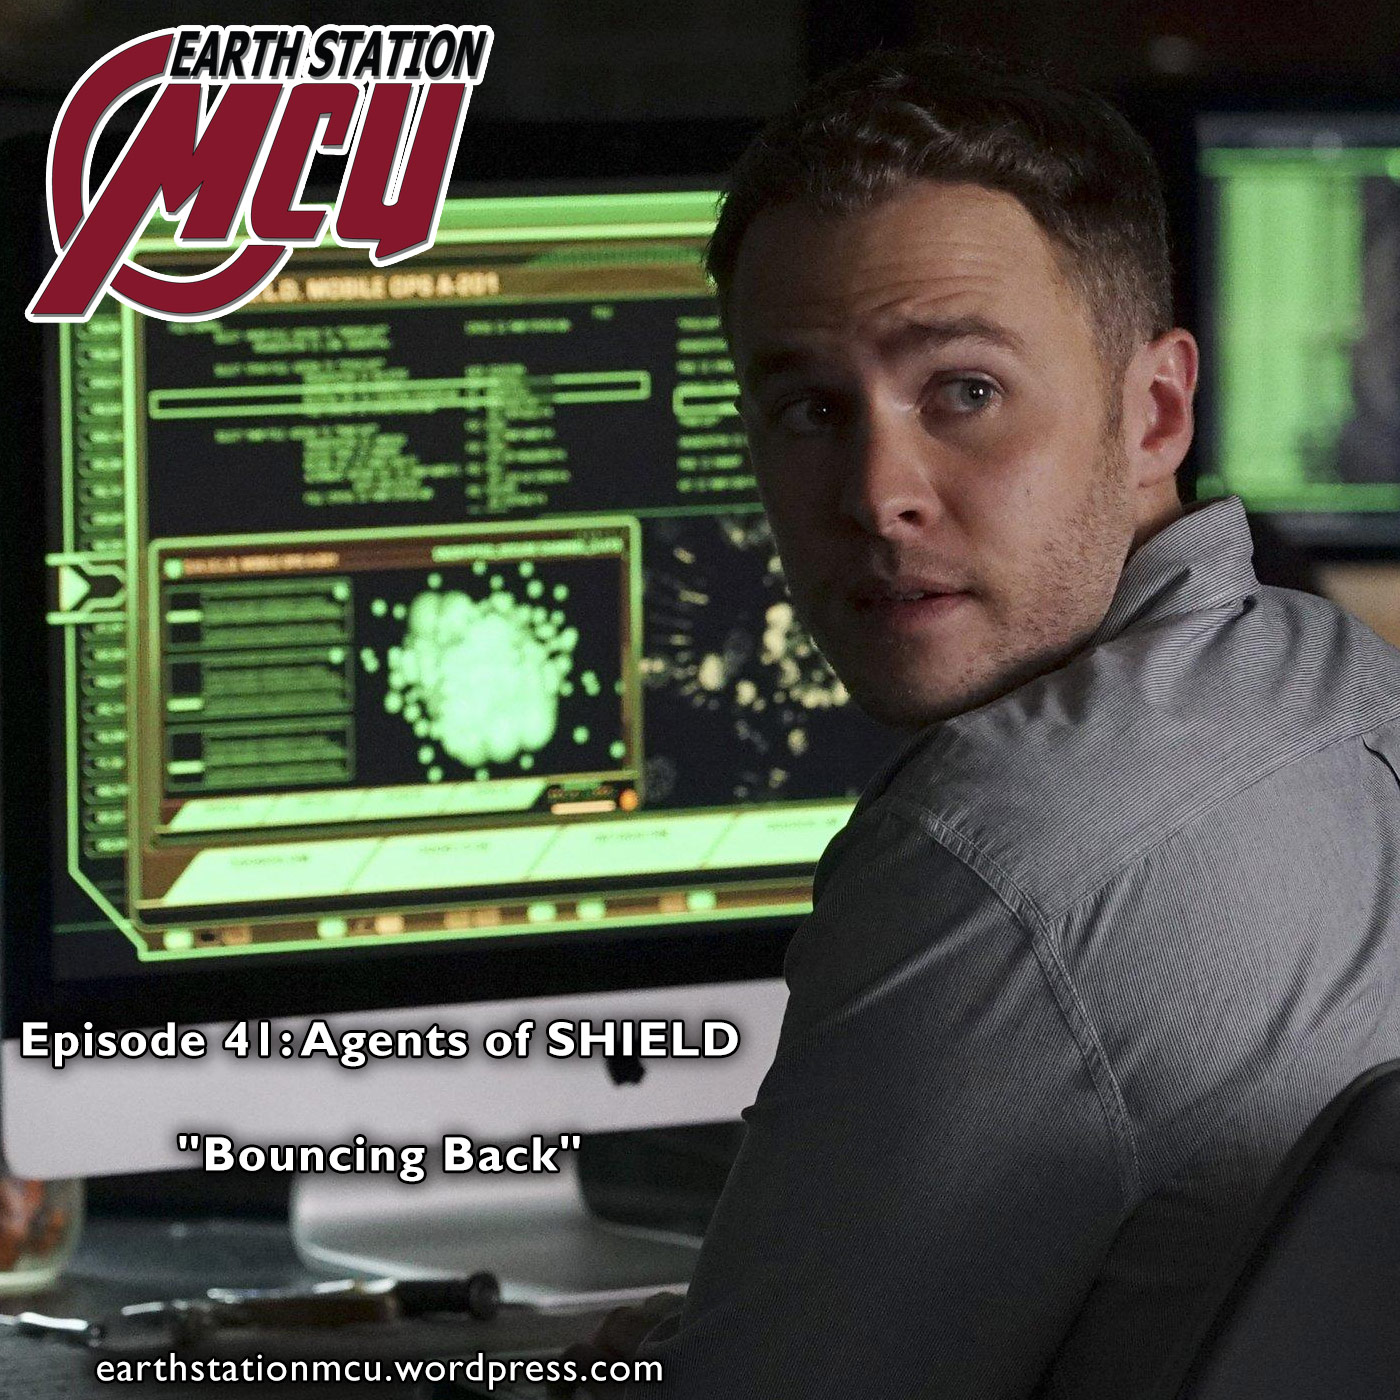 Earth Station MCU: Episode 41 - Agents of SHIELD "Bouncing Back"